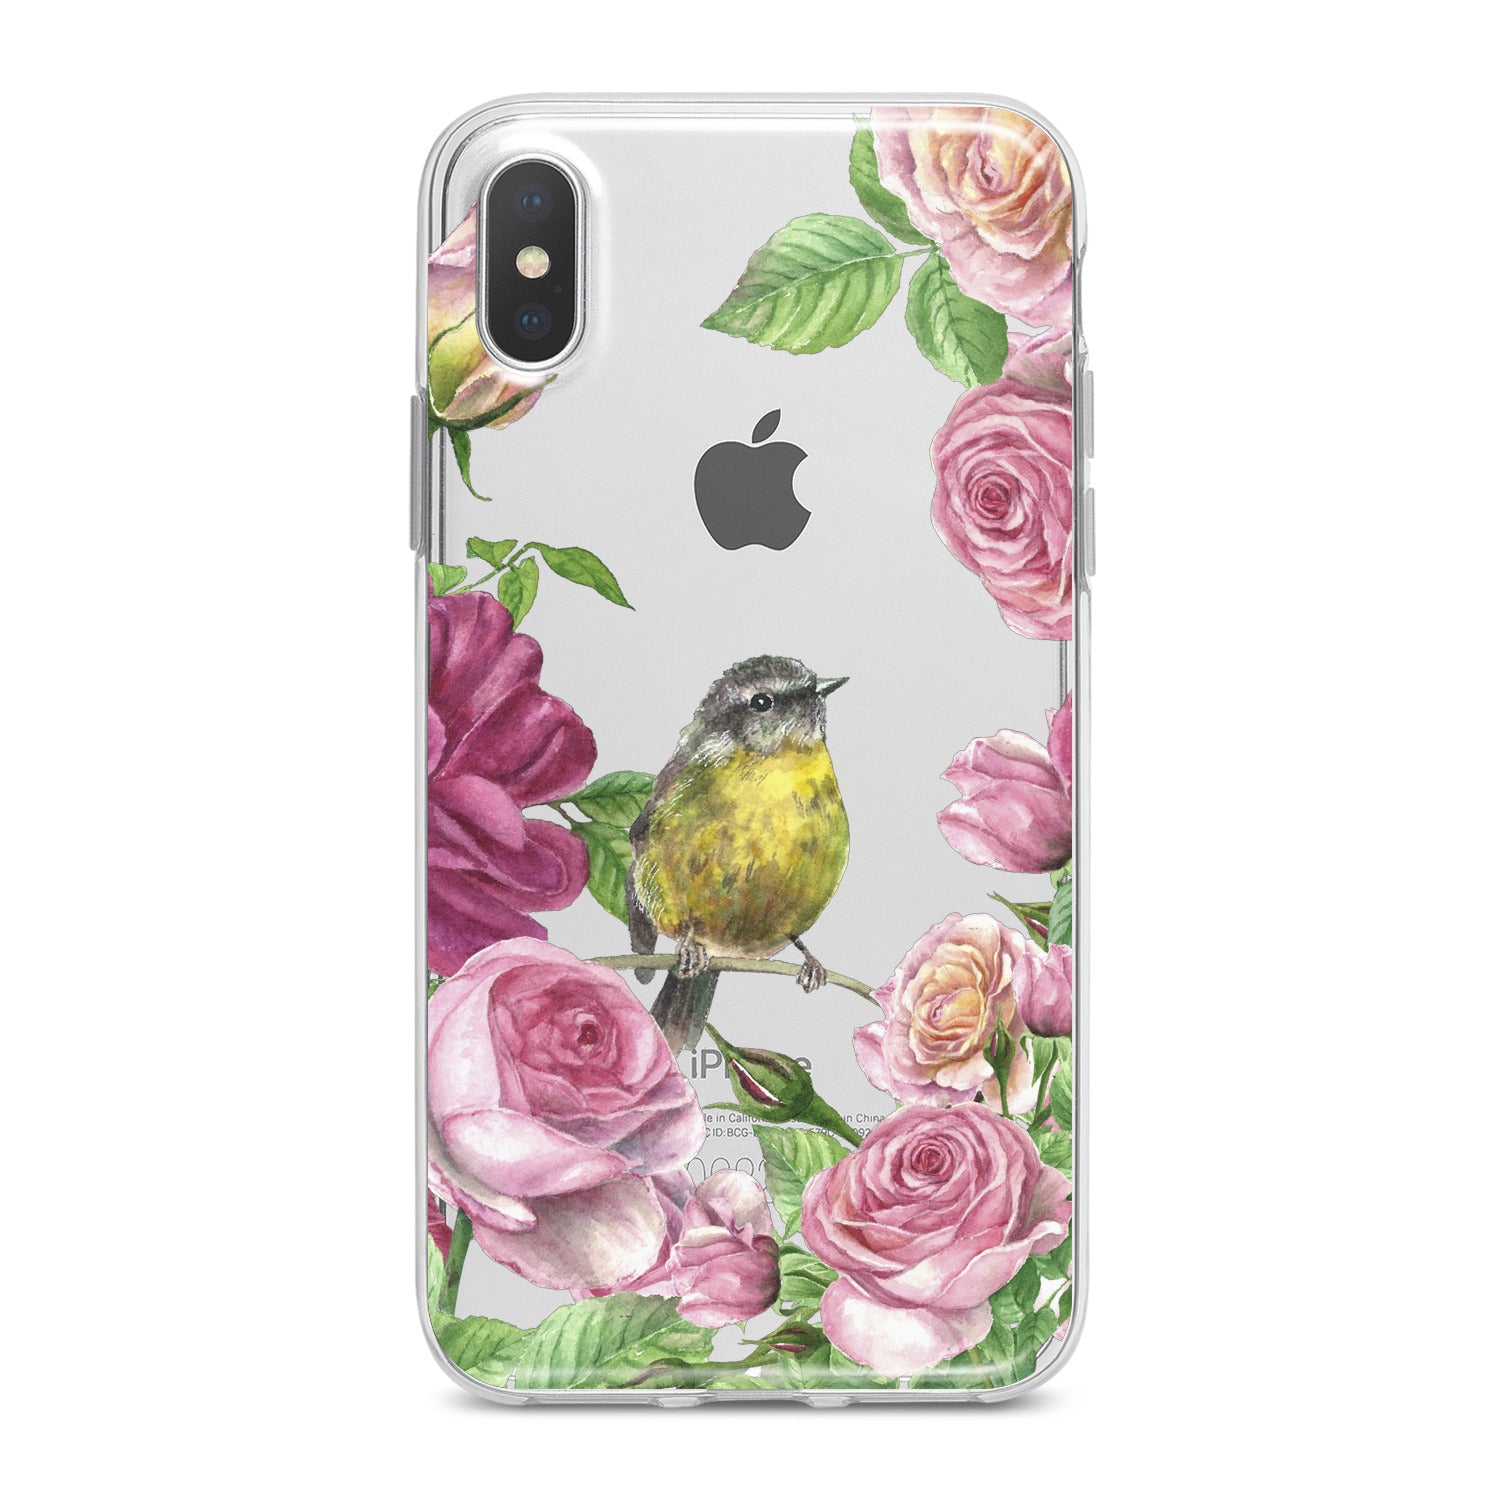 Lex Altern Garden Roses Phone Case for your iPhone & Android phone.